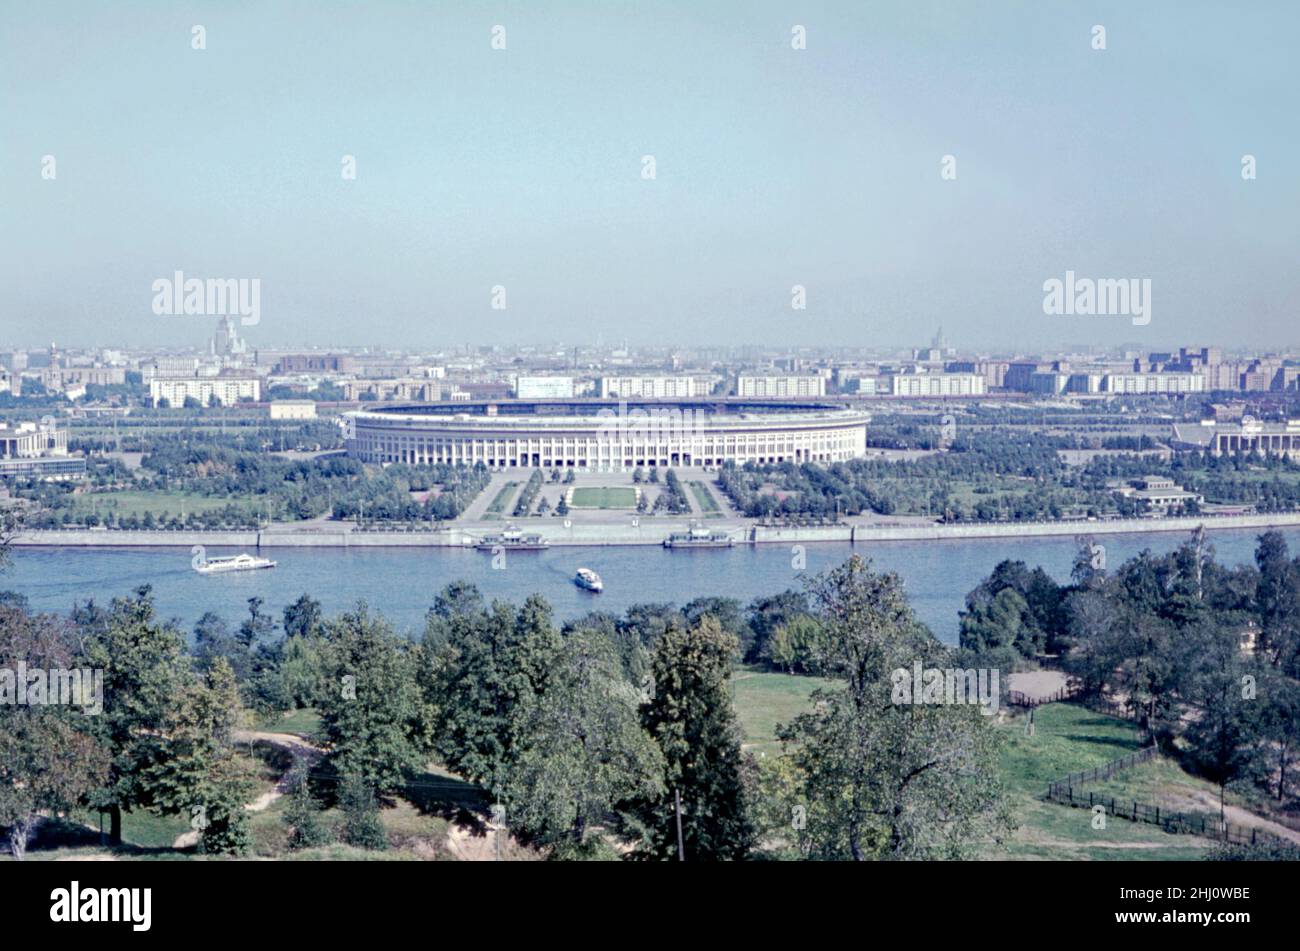 A 1960s photograph of the Luzhniki Stadium and its surroundings, located by the Moskva River, Moscow, Russia. The full name of the ‘National Stadium’ is ‘Grand Sports Arena of the Luzhniki Olympic Complex’. Its total seating capacity of 81,000 – the largest football stadium in Russia. The stadium was built in 1955–56 as the Grand Arena of the Central Lenin Stadium. The original stadium was demolished in 2013 to make way for a new stadium. However, the self-supported roof (built in1996) and the original facade wall were retained – a vintage 1960s photograph from an amateur colour transparency. Stock Photo